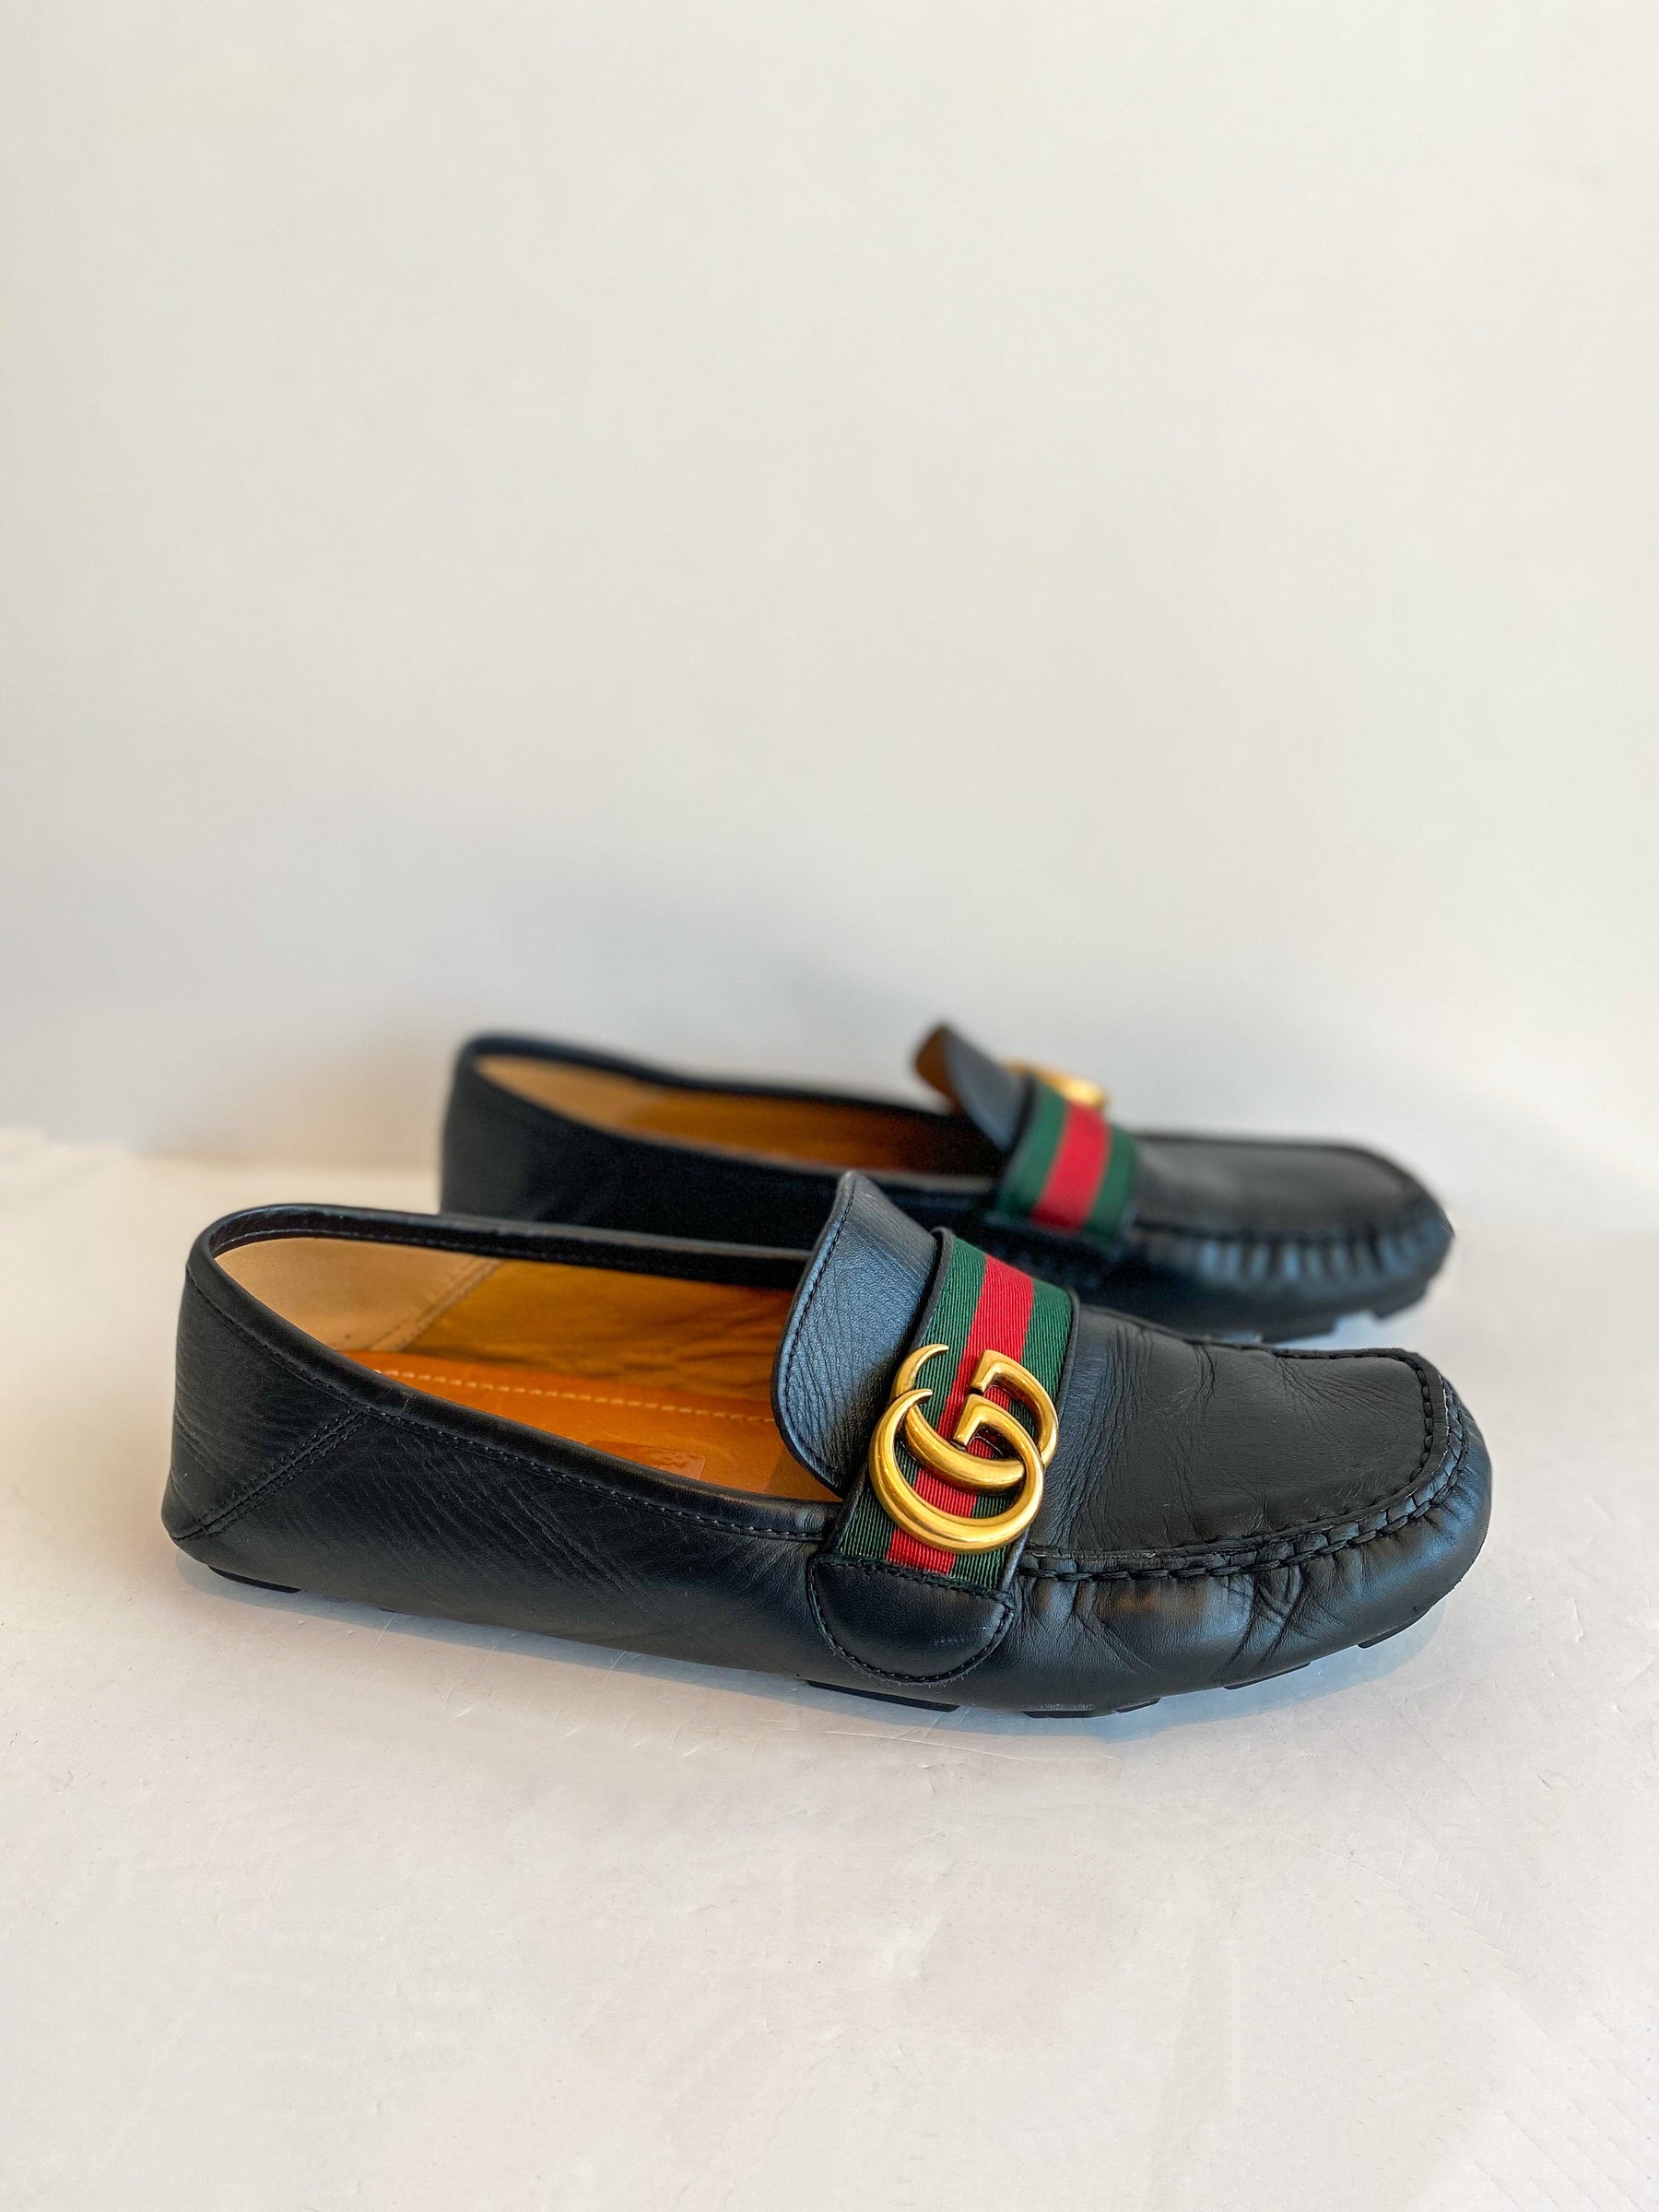 Gucci Logo Loafers Leather Black Gold Red Green Stripe Side of Shoes